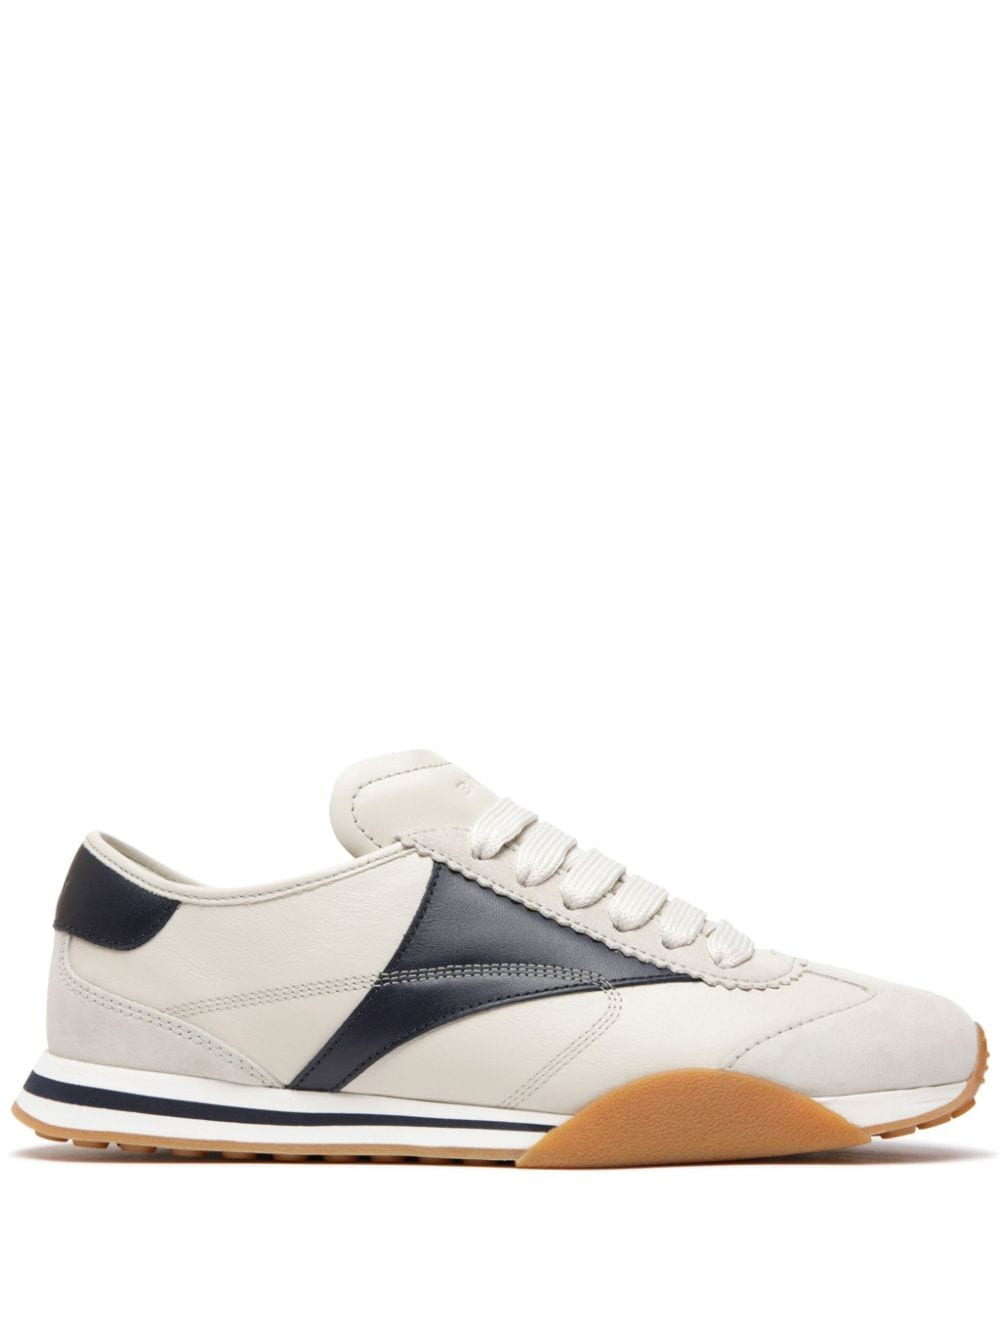 Bally Sonney Lace-up Leather Sneakers In White